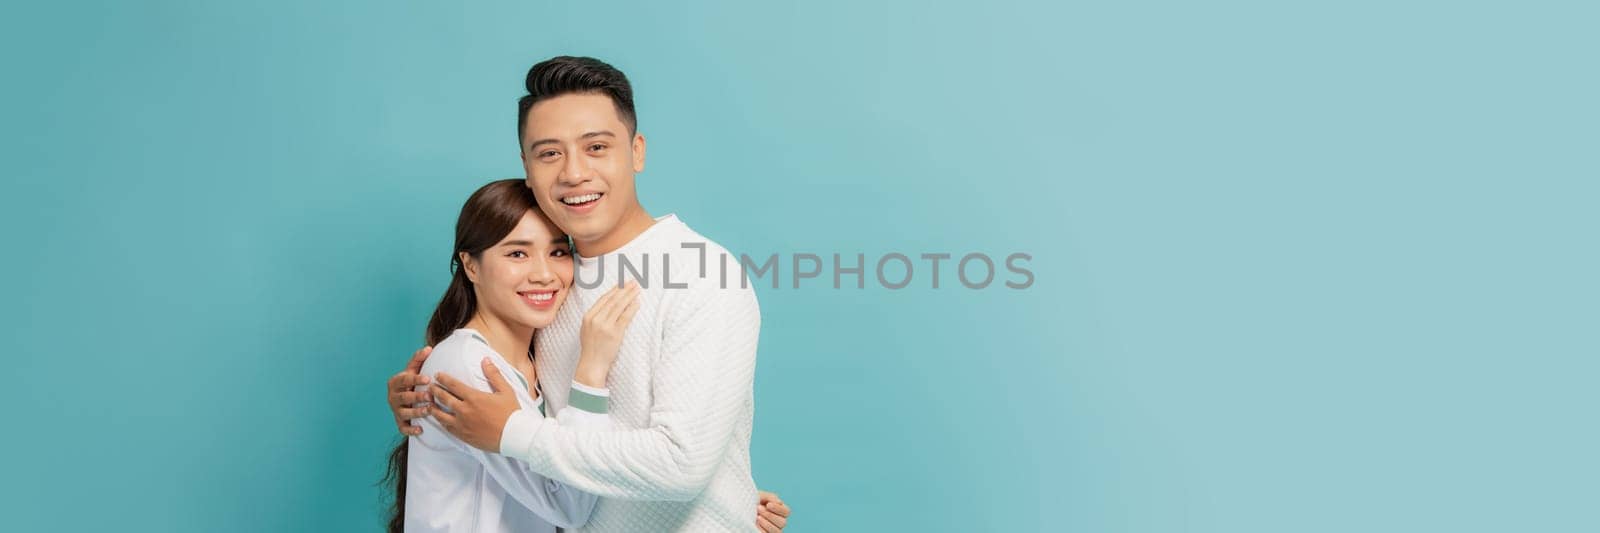 smiling young couple hugging and looking at camera, isolated on blue